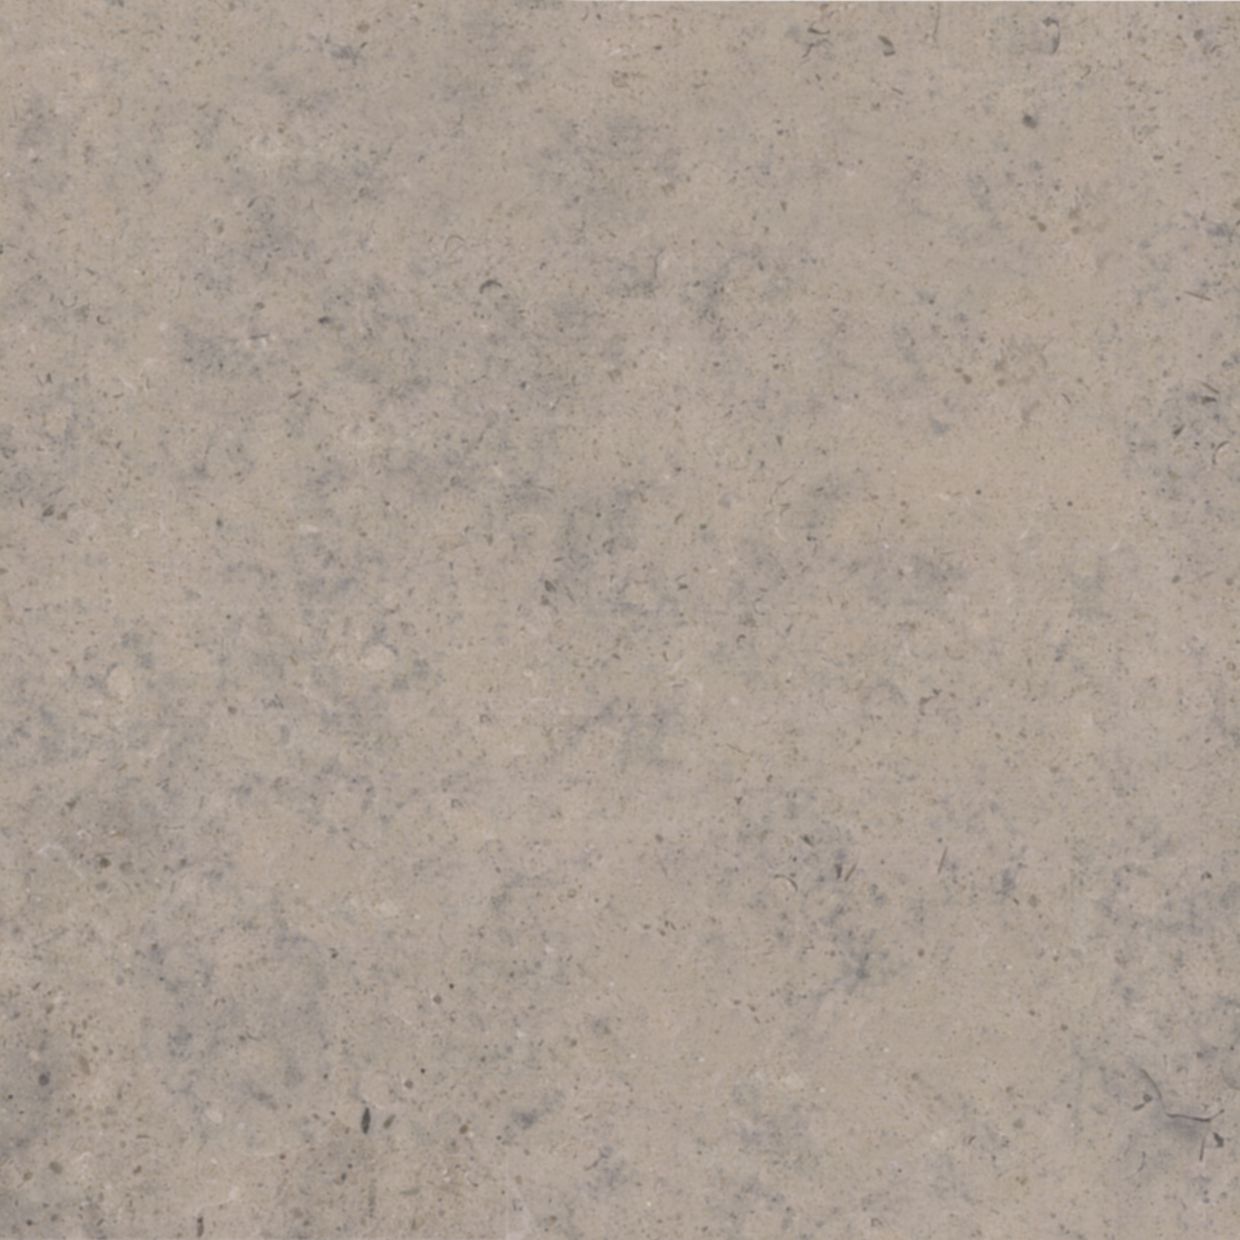 The NMZ is a beige / bluish colored limestone.